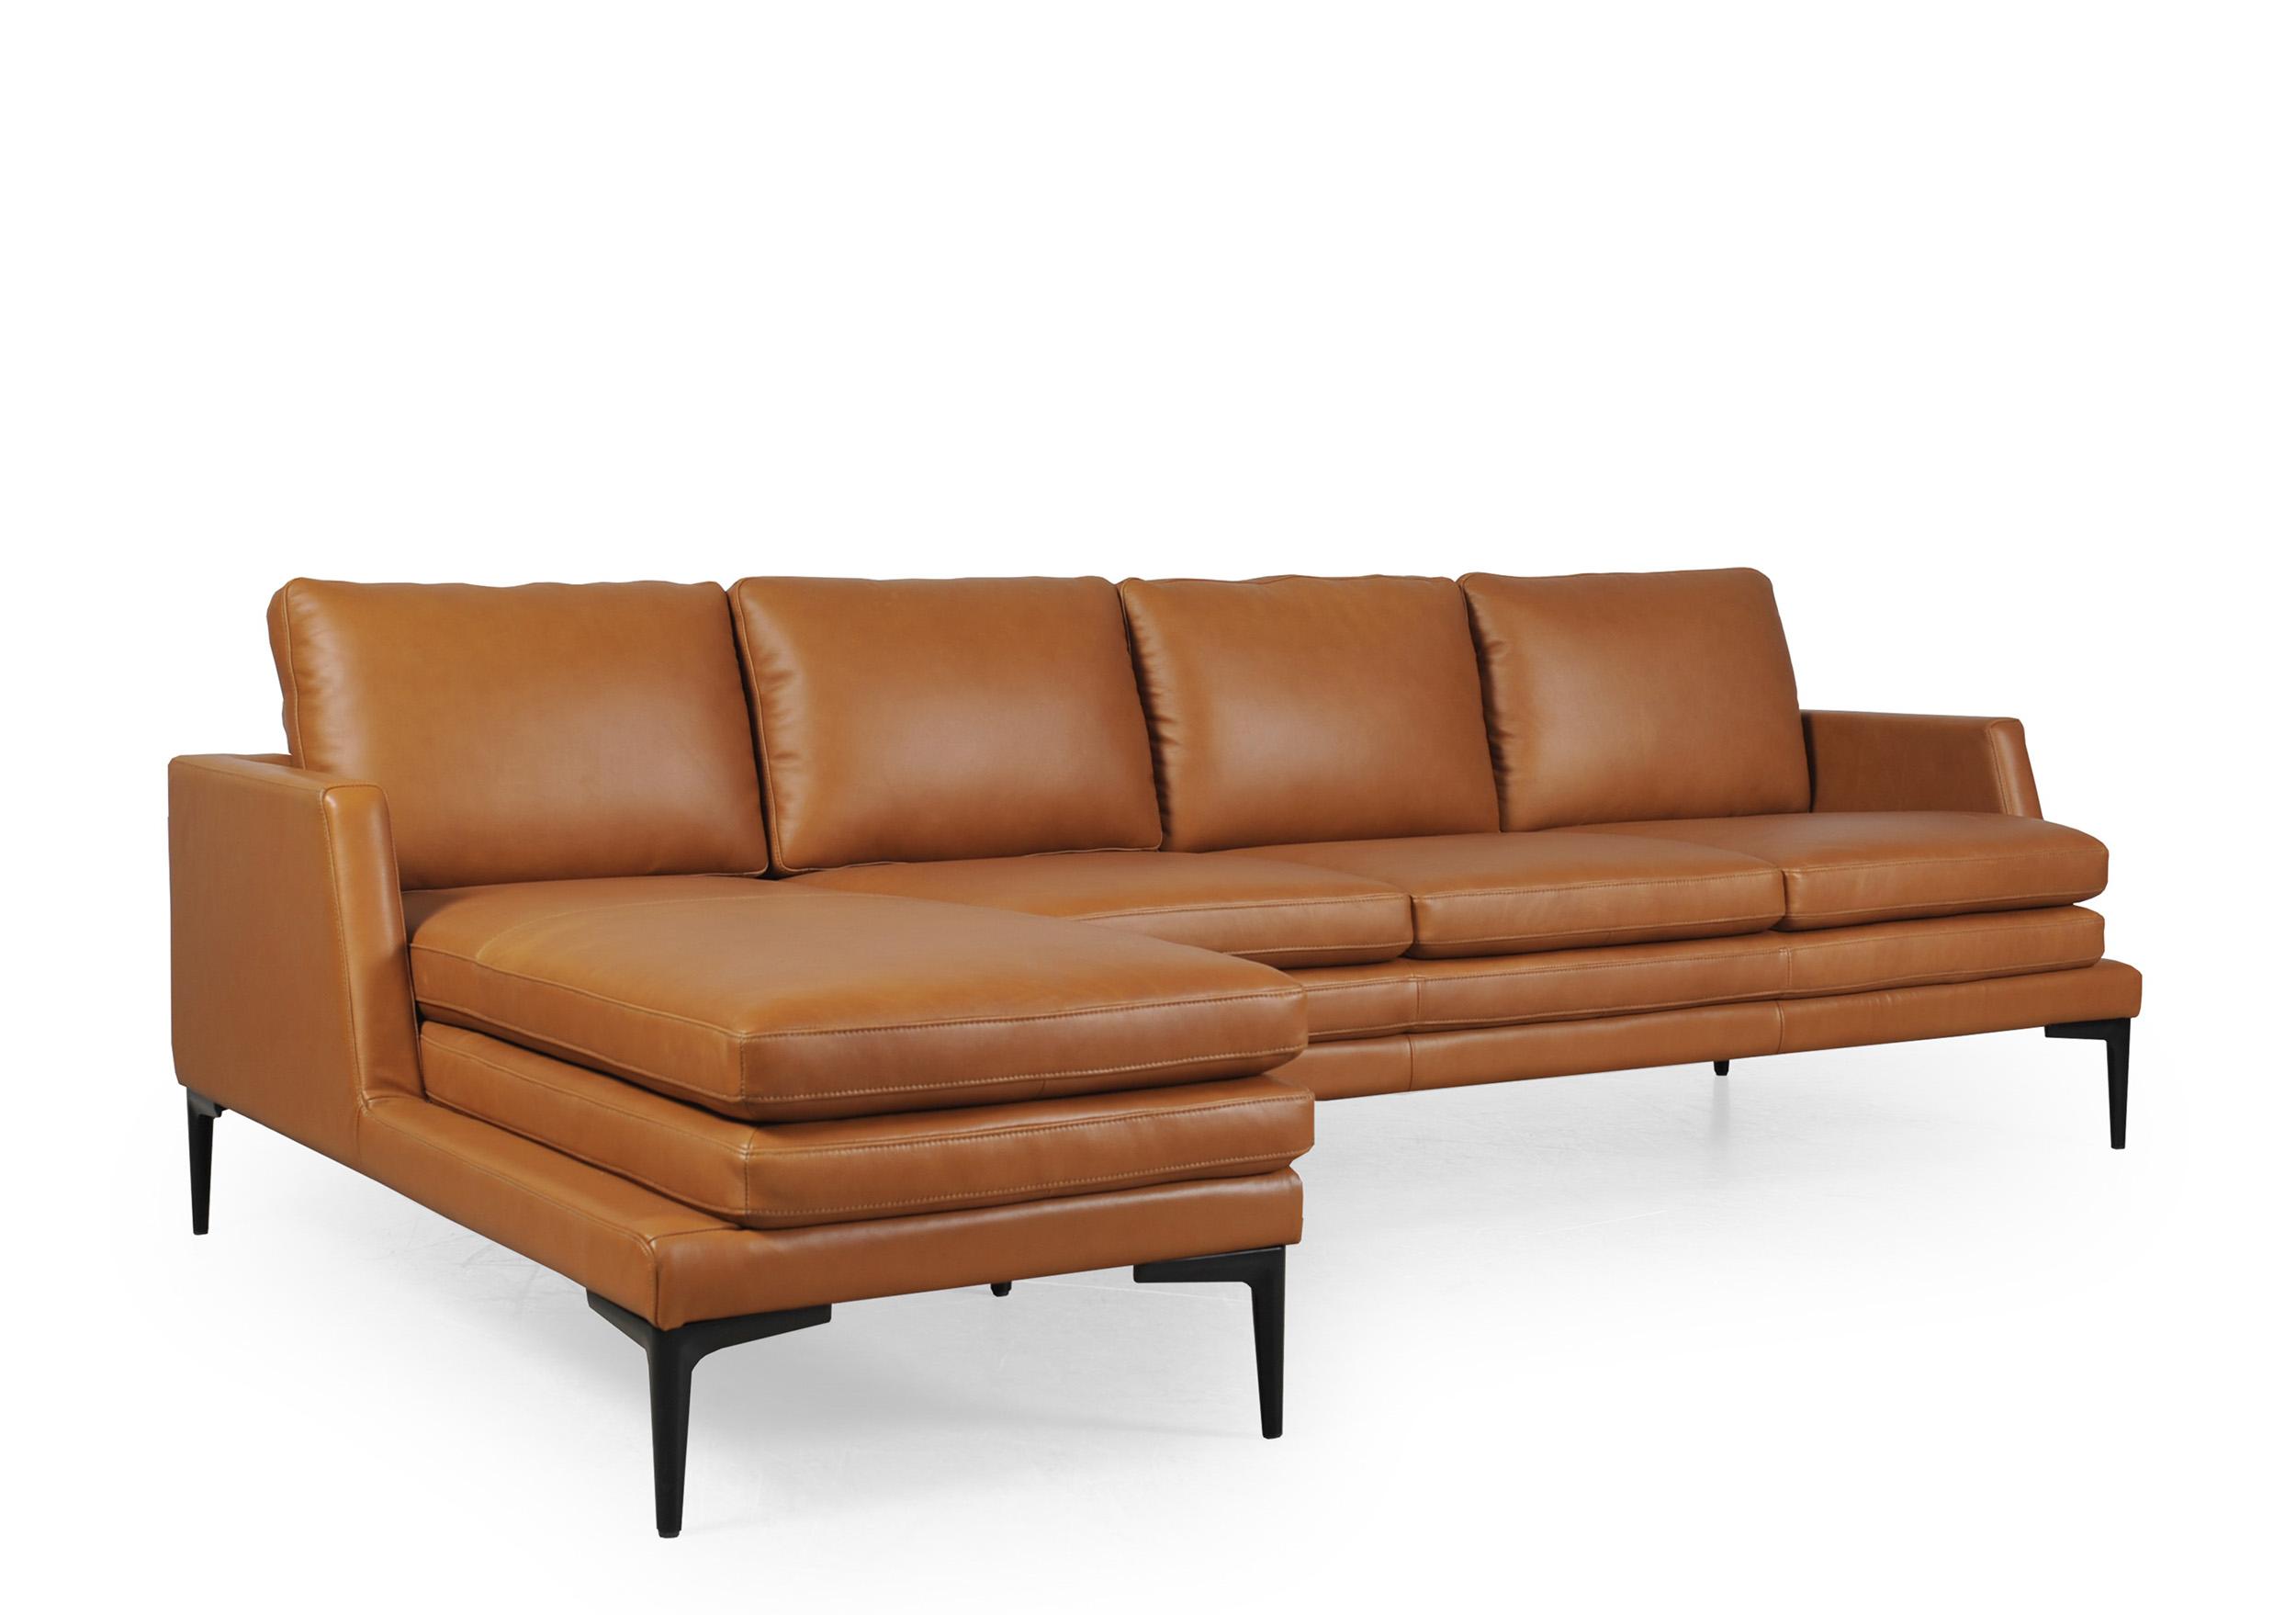 Contemporary, Modern Sectional Sofa 439 Rica 439SCBS1961 in Tan Top grain leather